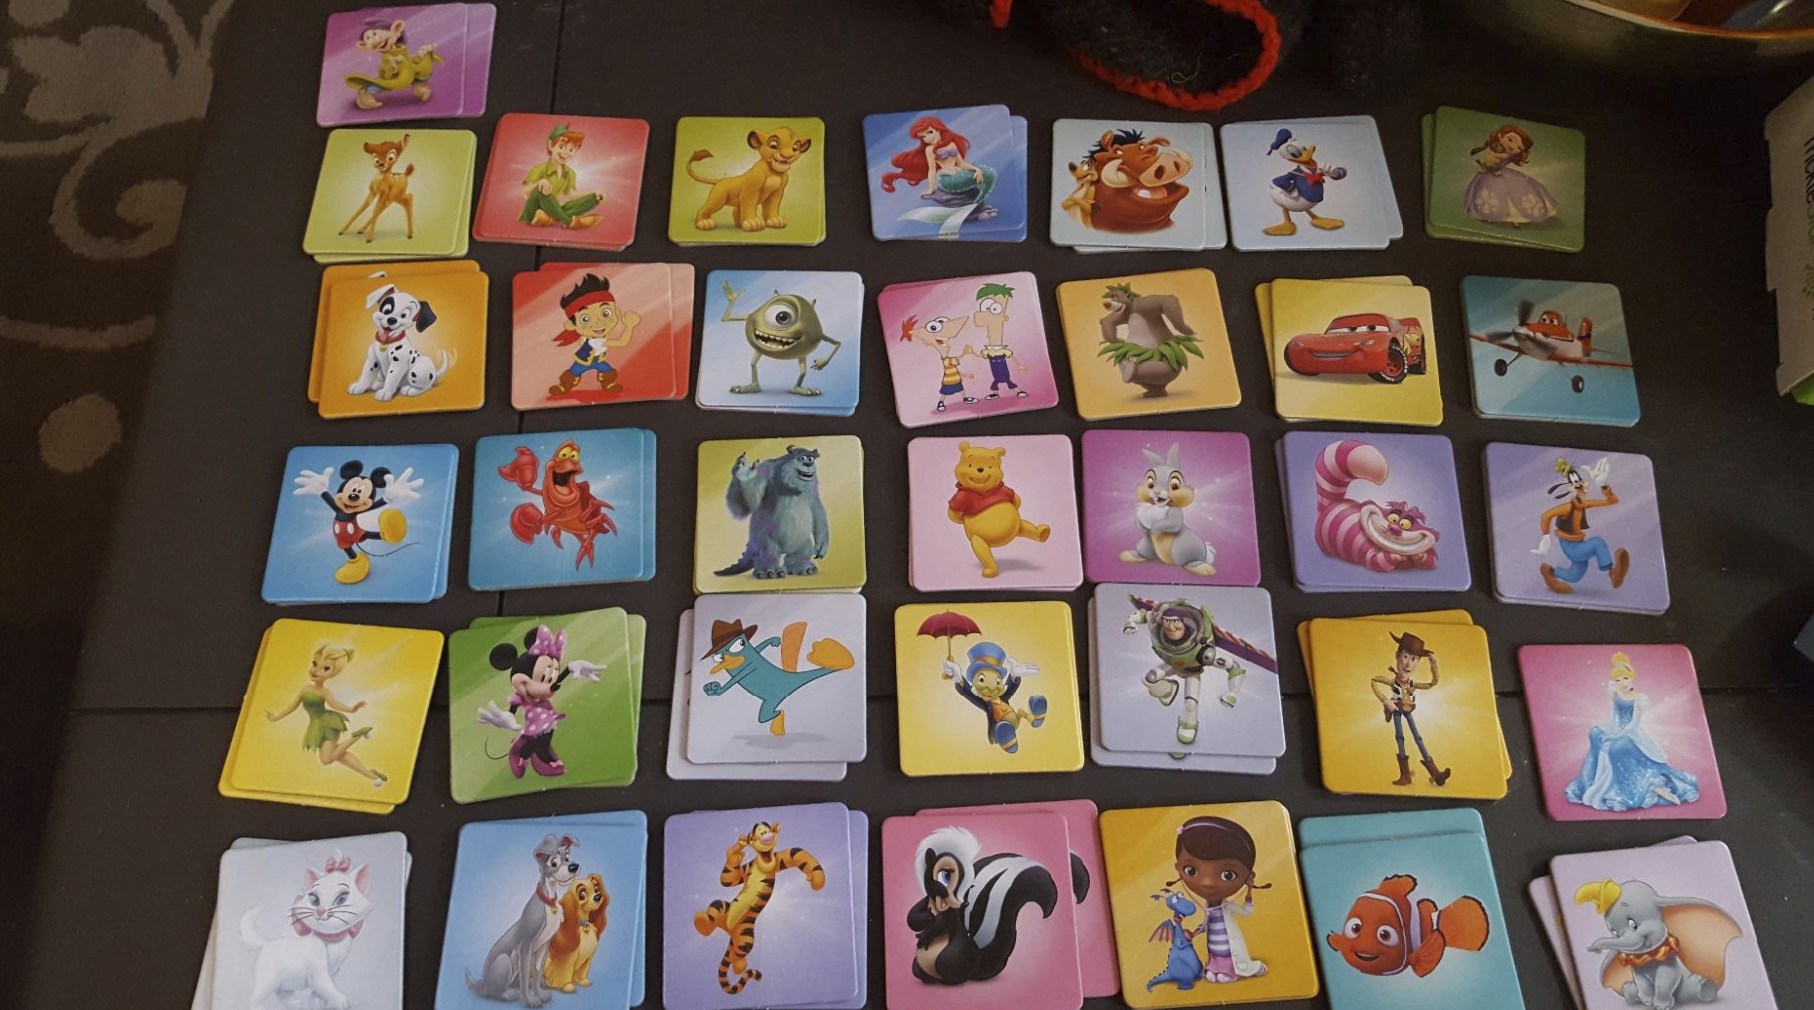 cards laid out with Disney and Pixar/Disney characters. Three examples here are Nemo from &quot;Finding Nemo,&quot; Simba from &quot;The Lion King,&quot; and Phineas and Ferb from the namesake show.